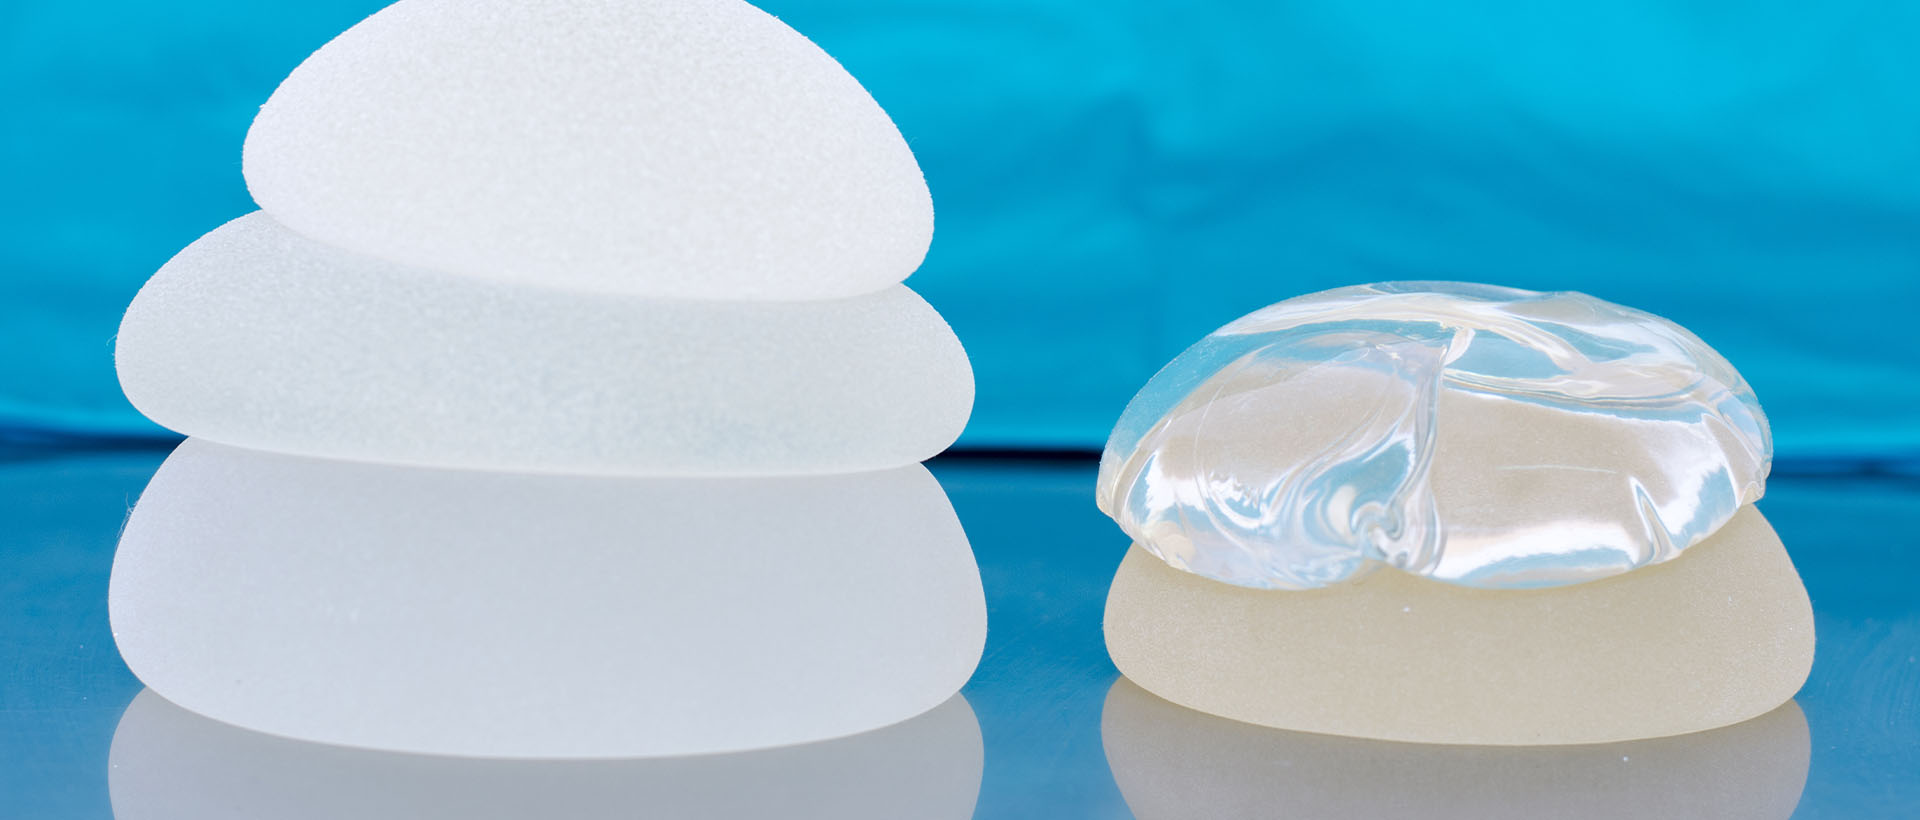 Silicone breast implant for breast augmentation